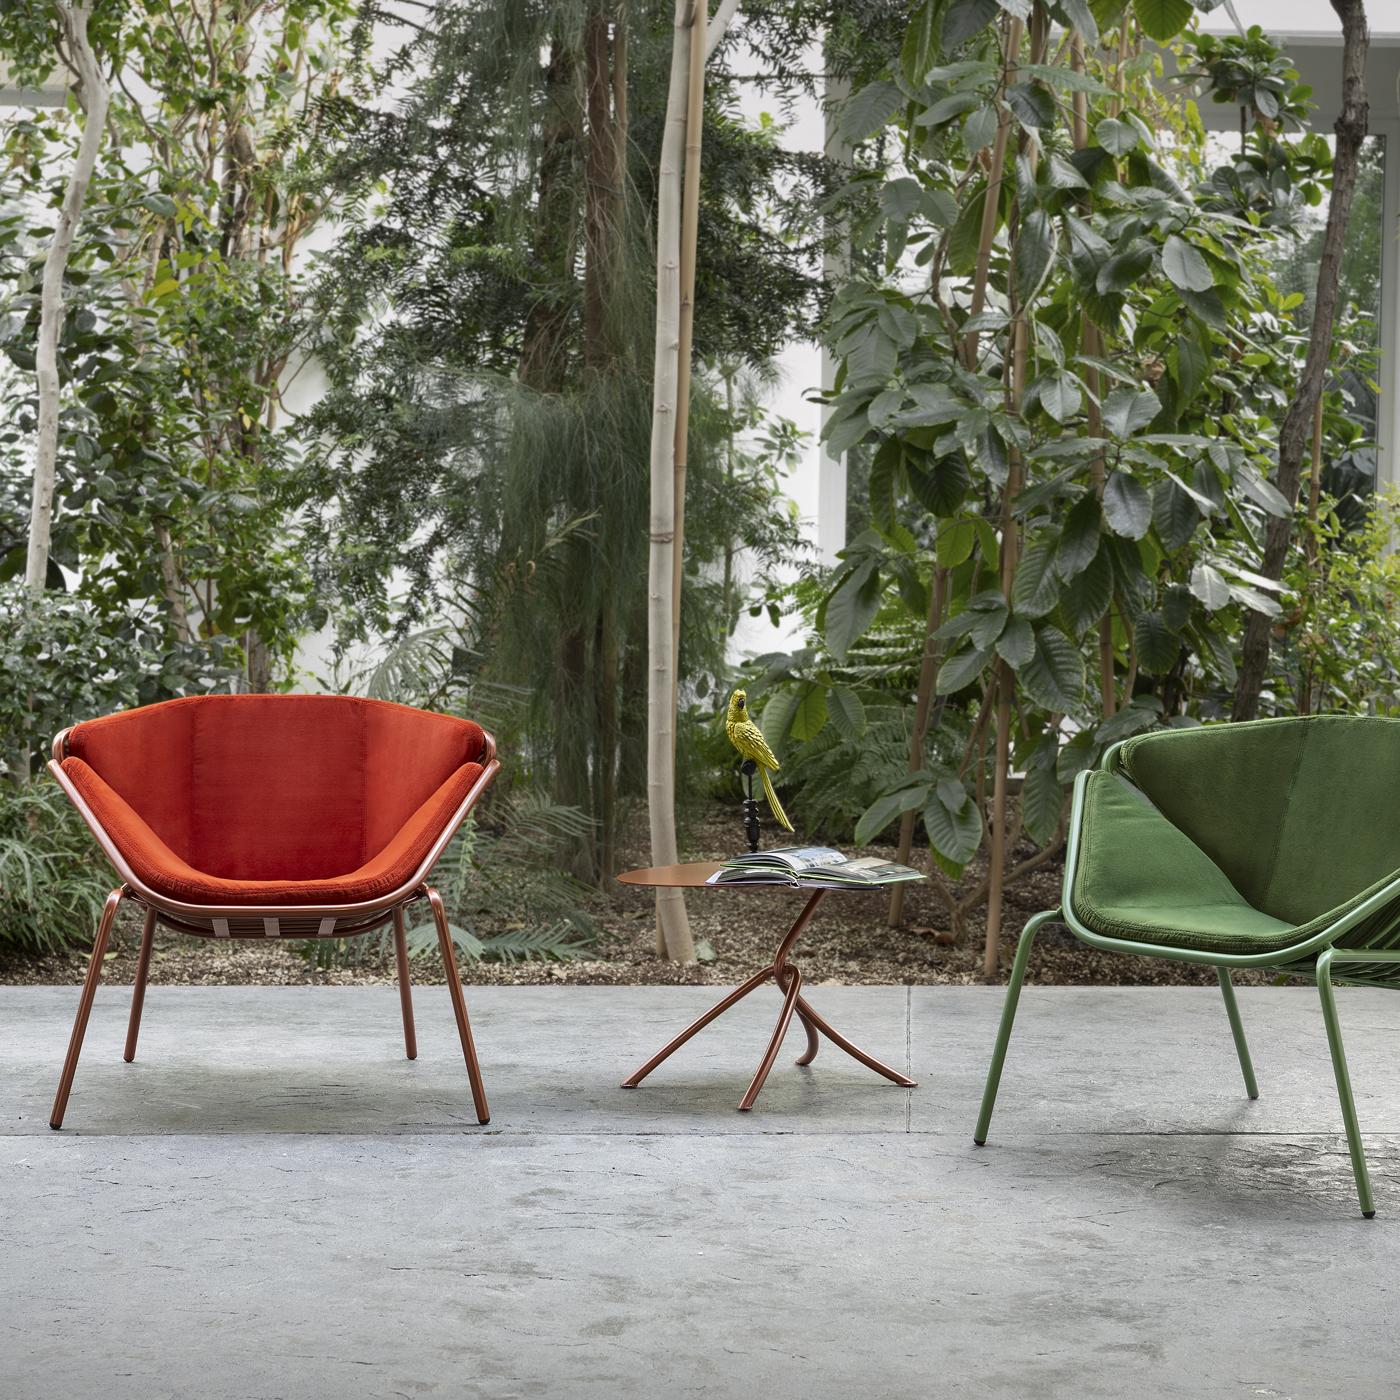 Entirely lacquered in a green hue, this striking chair has a contemporary and unique allure. It comprises a tubular metal frame with a crisscrossed design on the back and robust slanted legs, where a soft and comfortable fabric green cushion padded